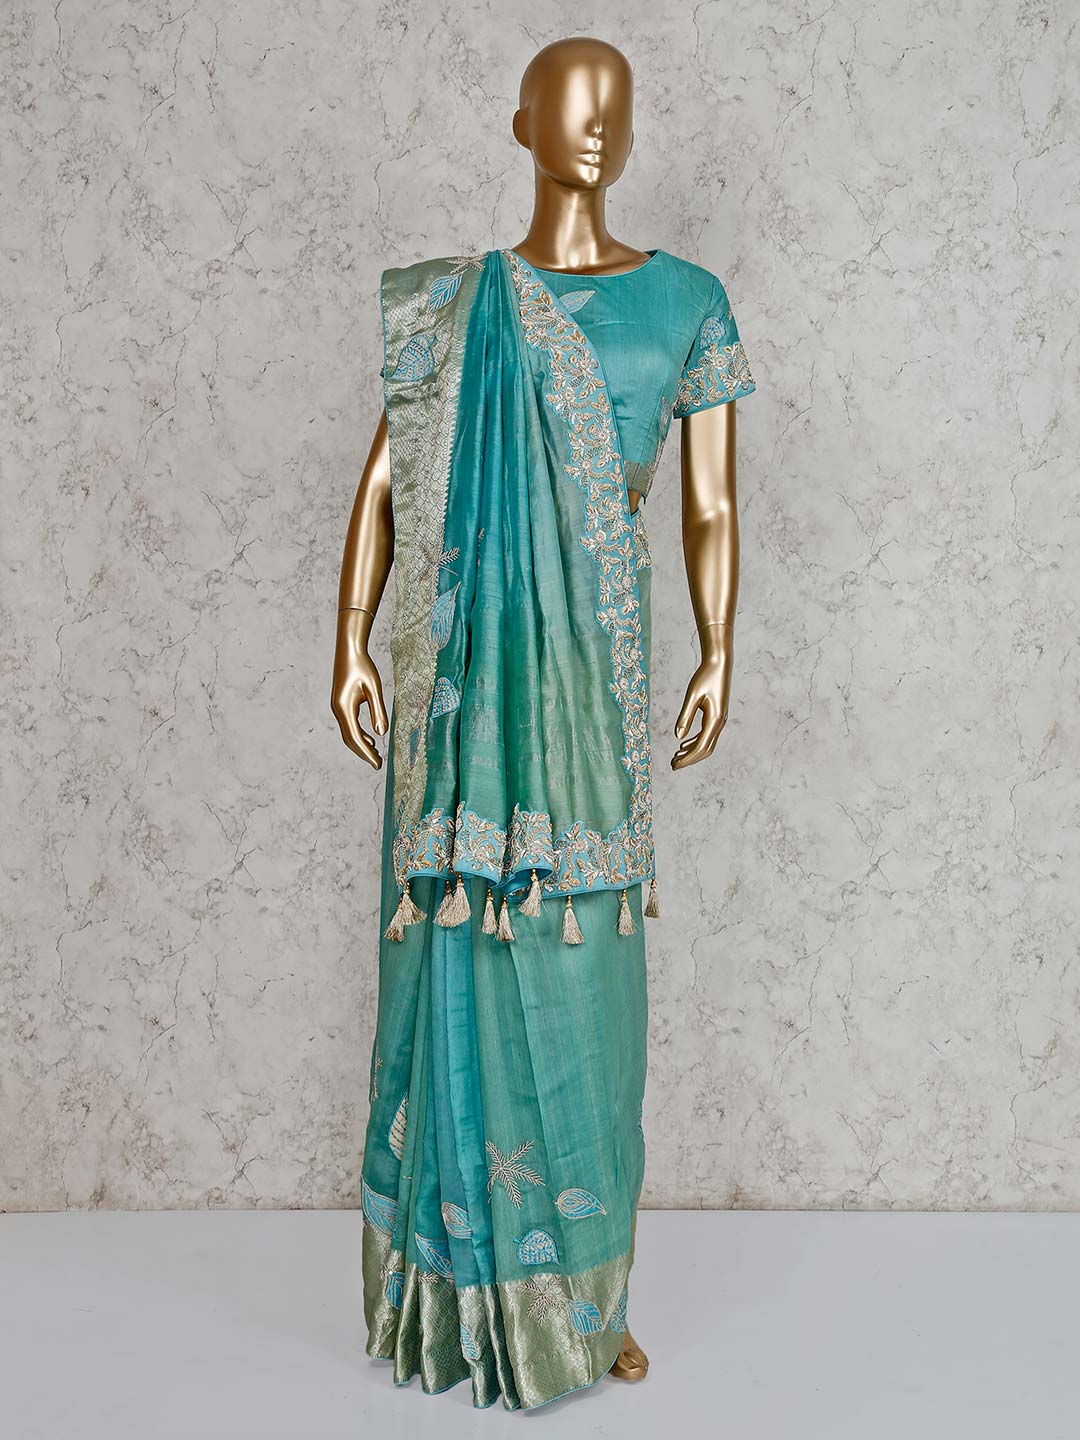 Aqua Green Embroidered Saree In Pure Silk With Ready Made Blouse G3 Wsa39812 G3fashion Com